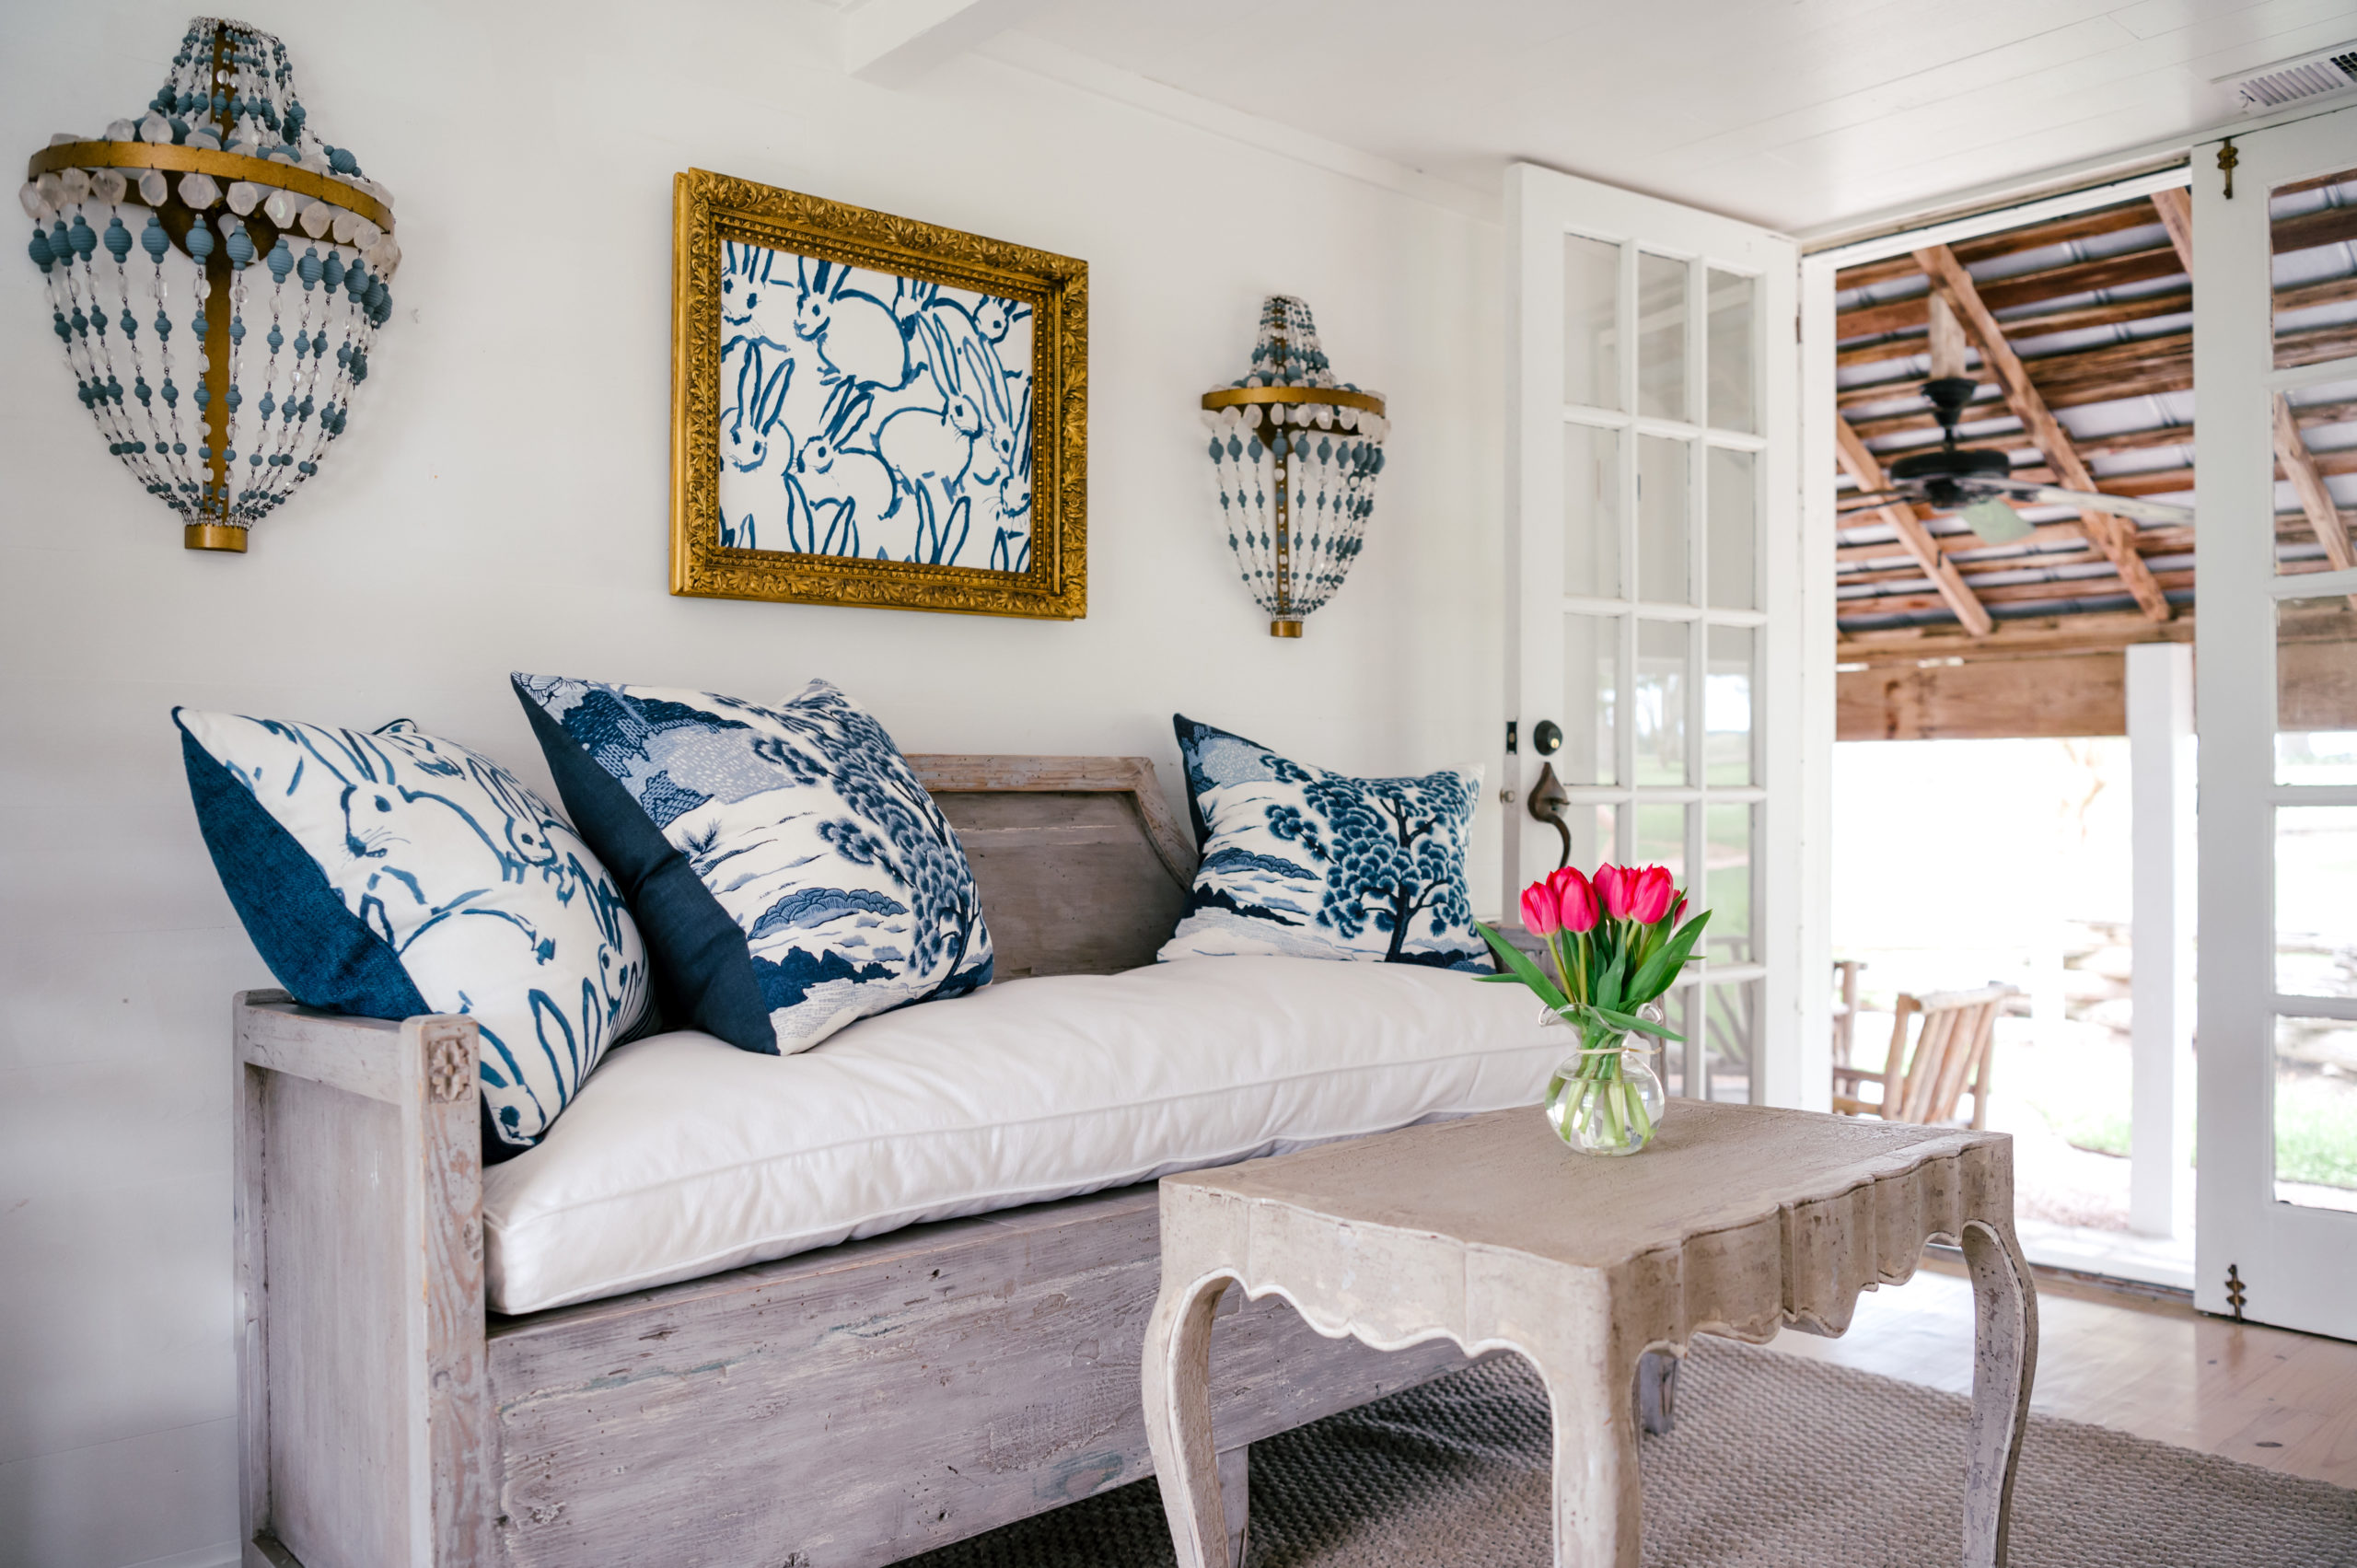 Photo of wooden couch and white and blue cushions in a room with a frame of blue bunnies and beautiful chandler lamps and a grey table with pink flowers on the table